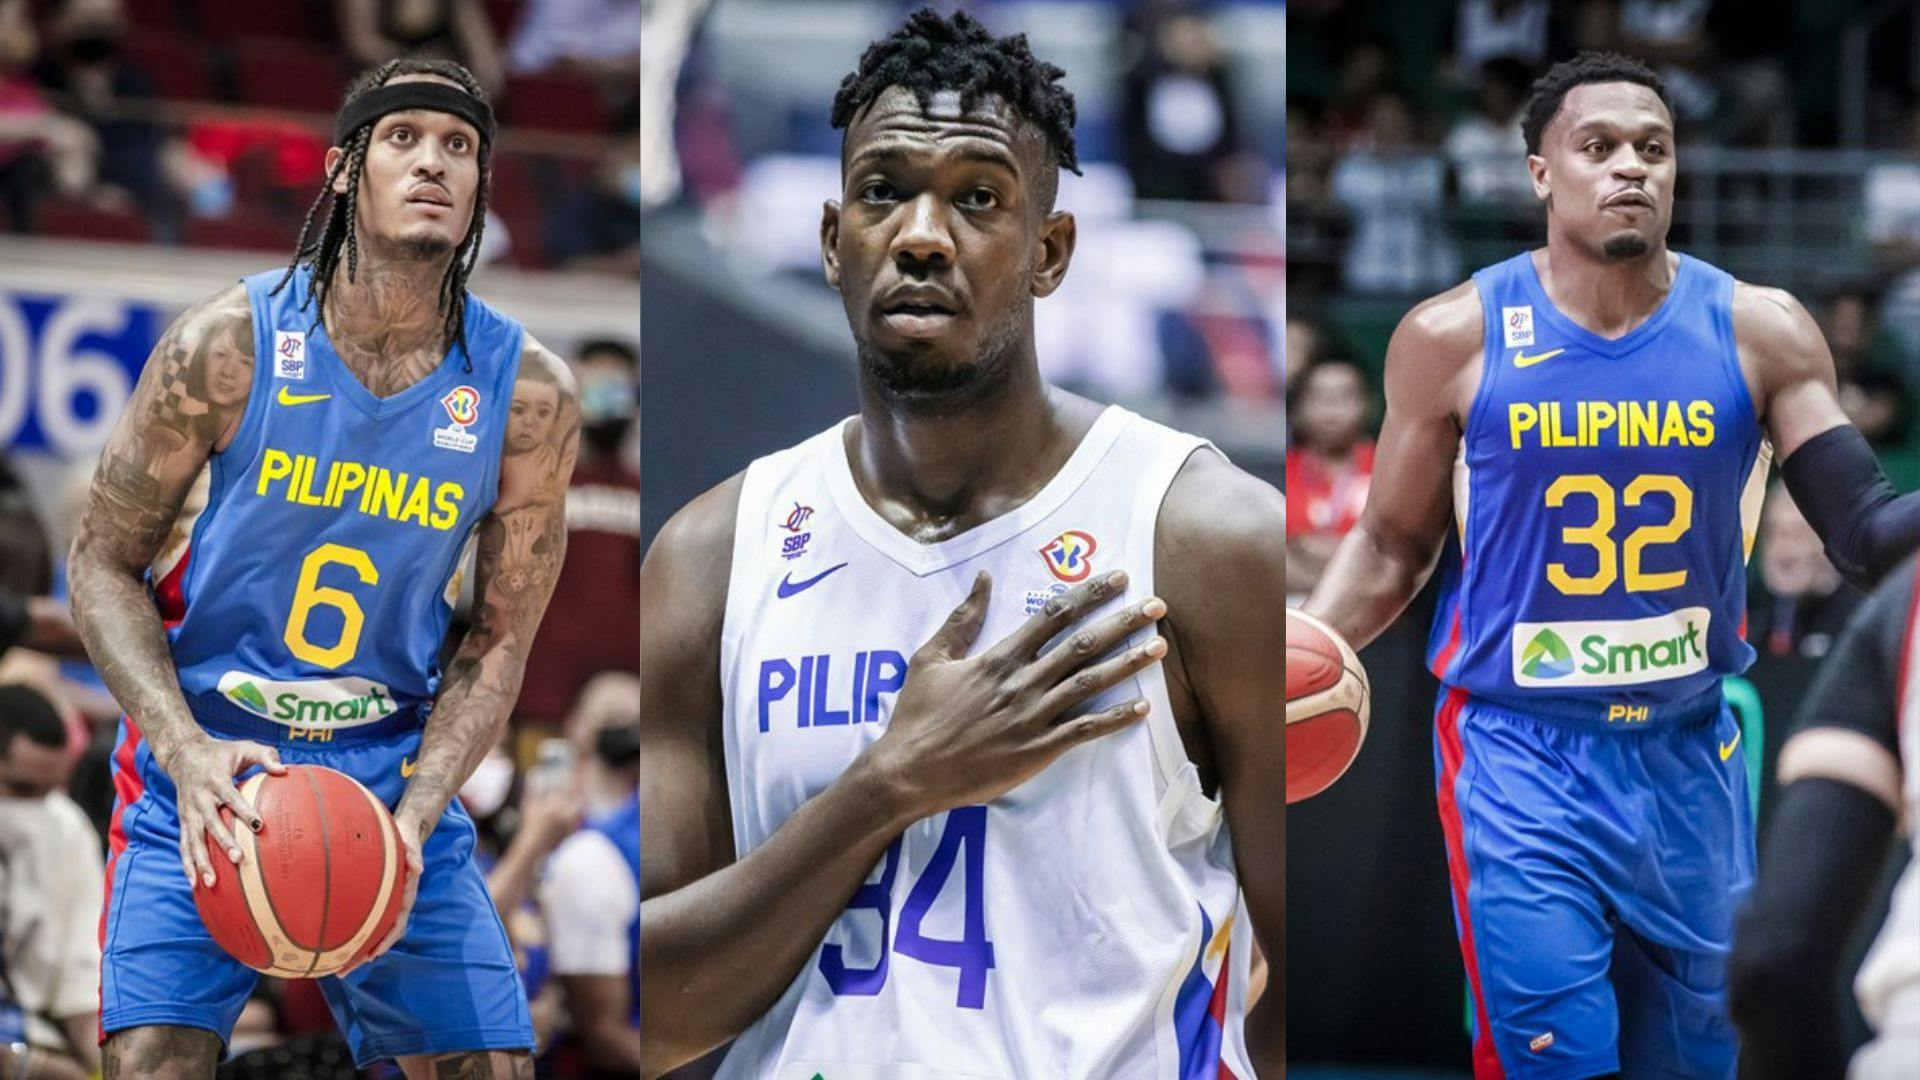 JC or JB for FIBA World Cup? Ange Kouame weighs in on debate